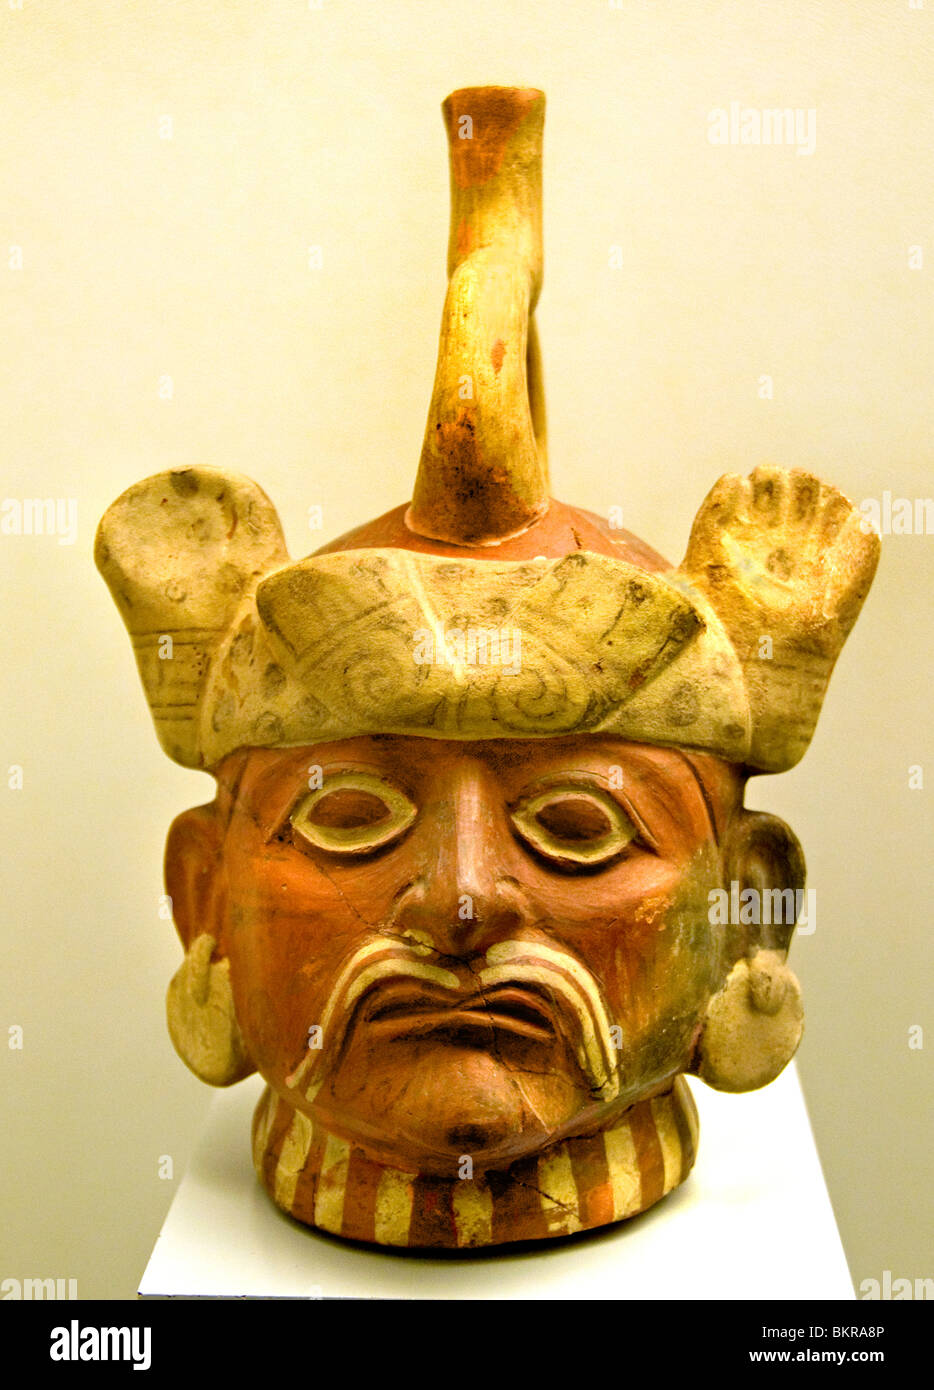 Great Lord as indicated by his headdress of feline claws, his large ear flaps and his face paint,  Moche or Mochica 100 AD - 700 AD. Peru Peruvian. Stock Photo